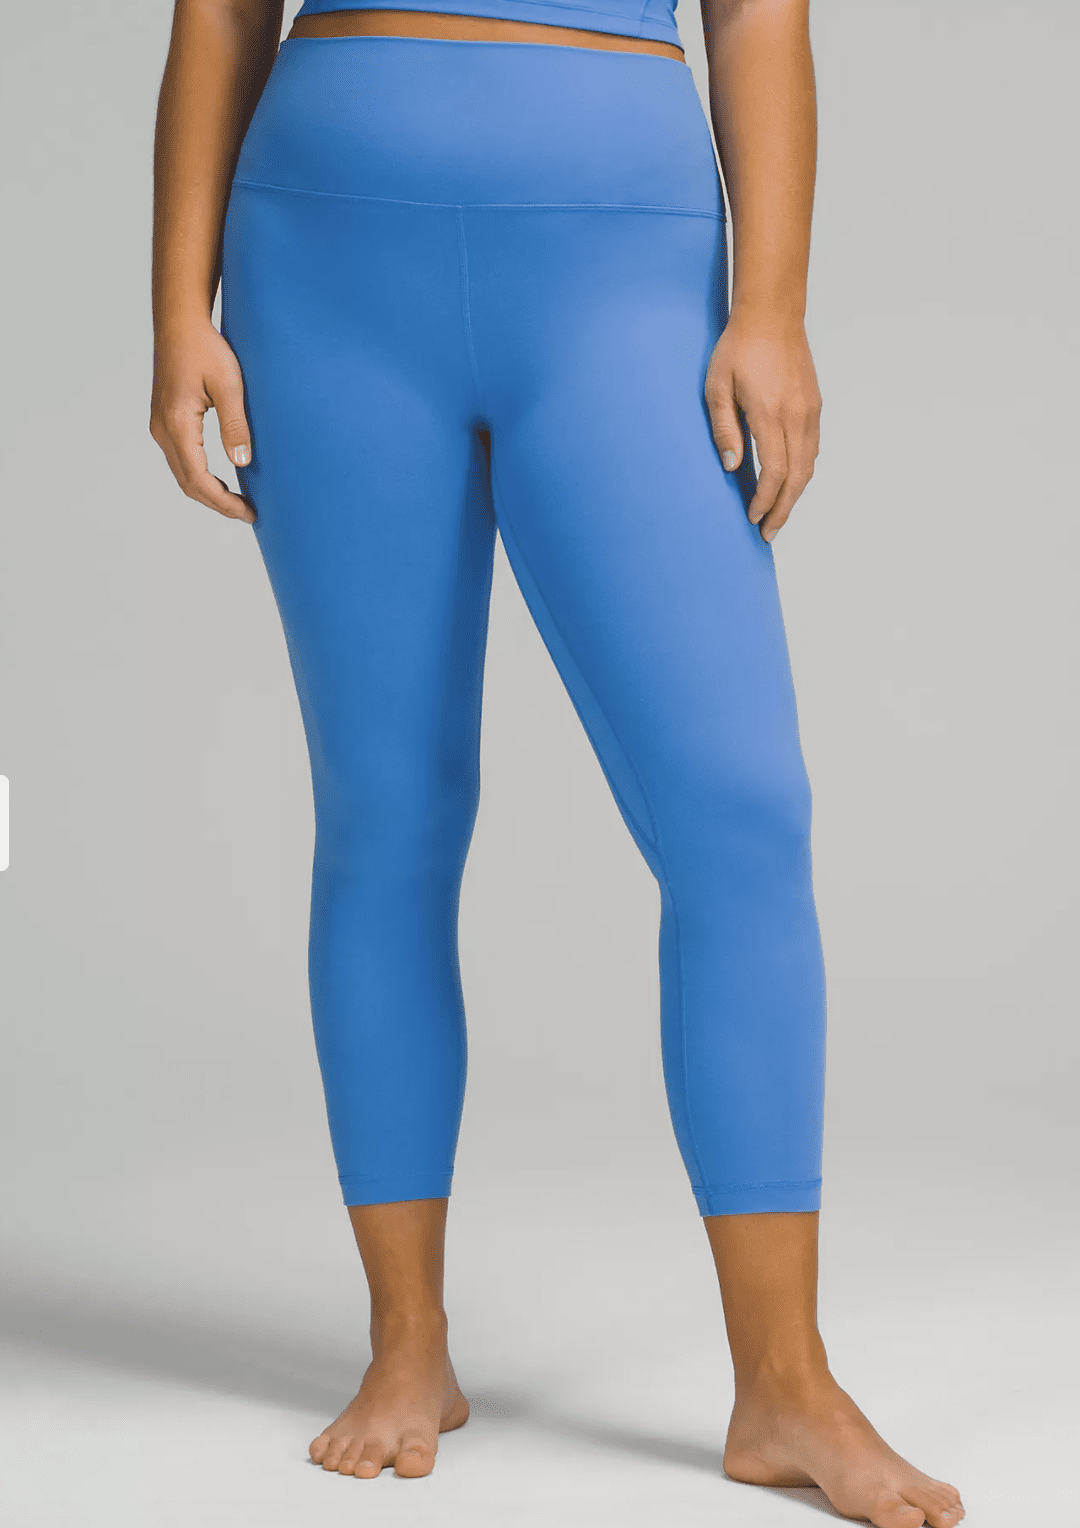 5 Pops of Color lululemon Added to Their Women's Line for Spring